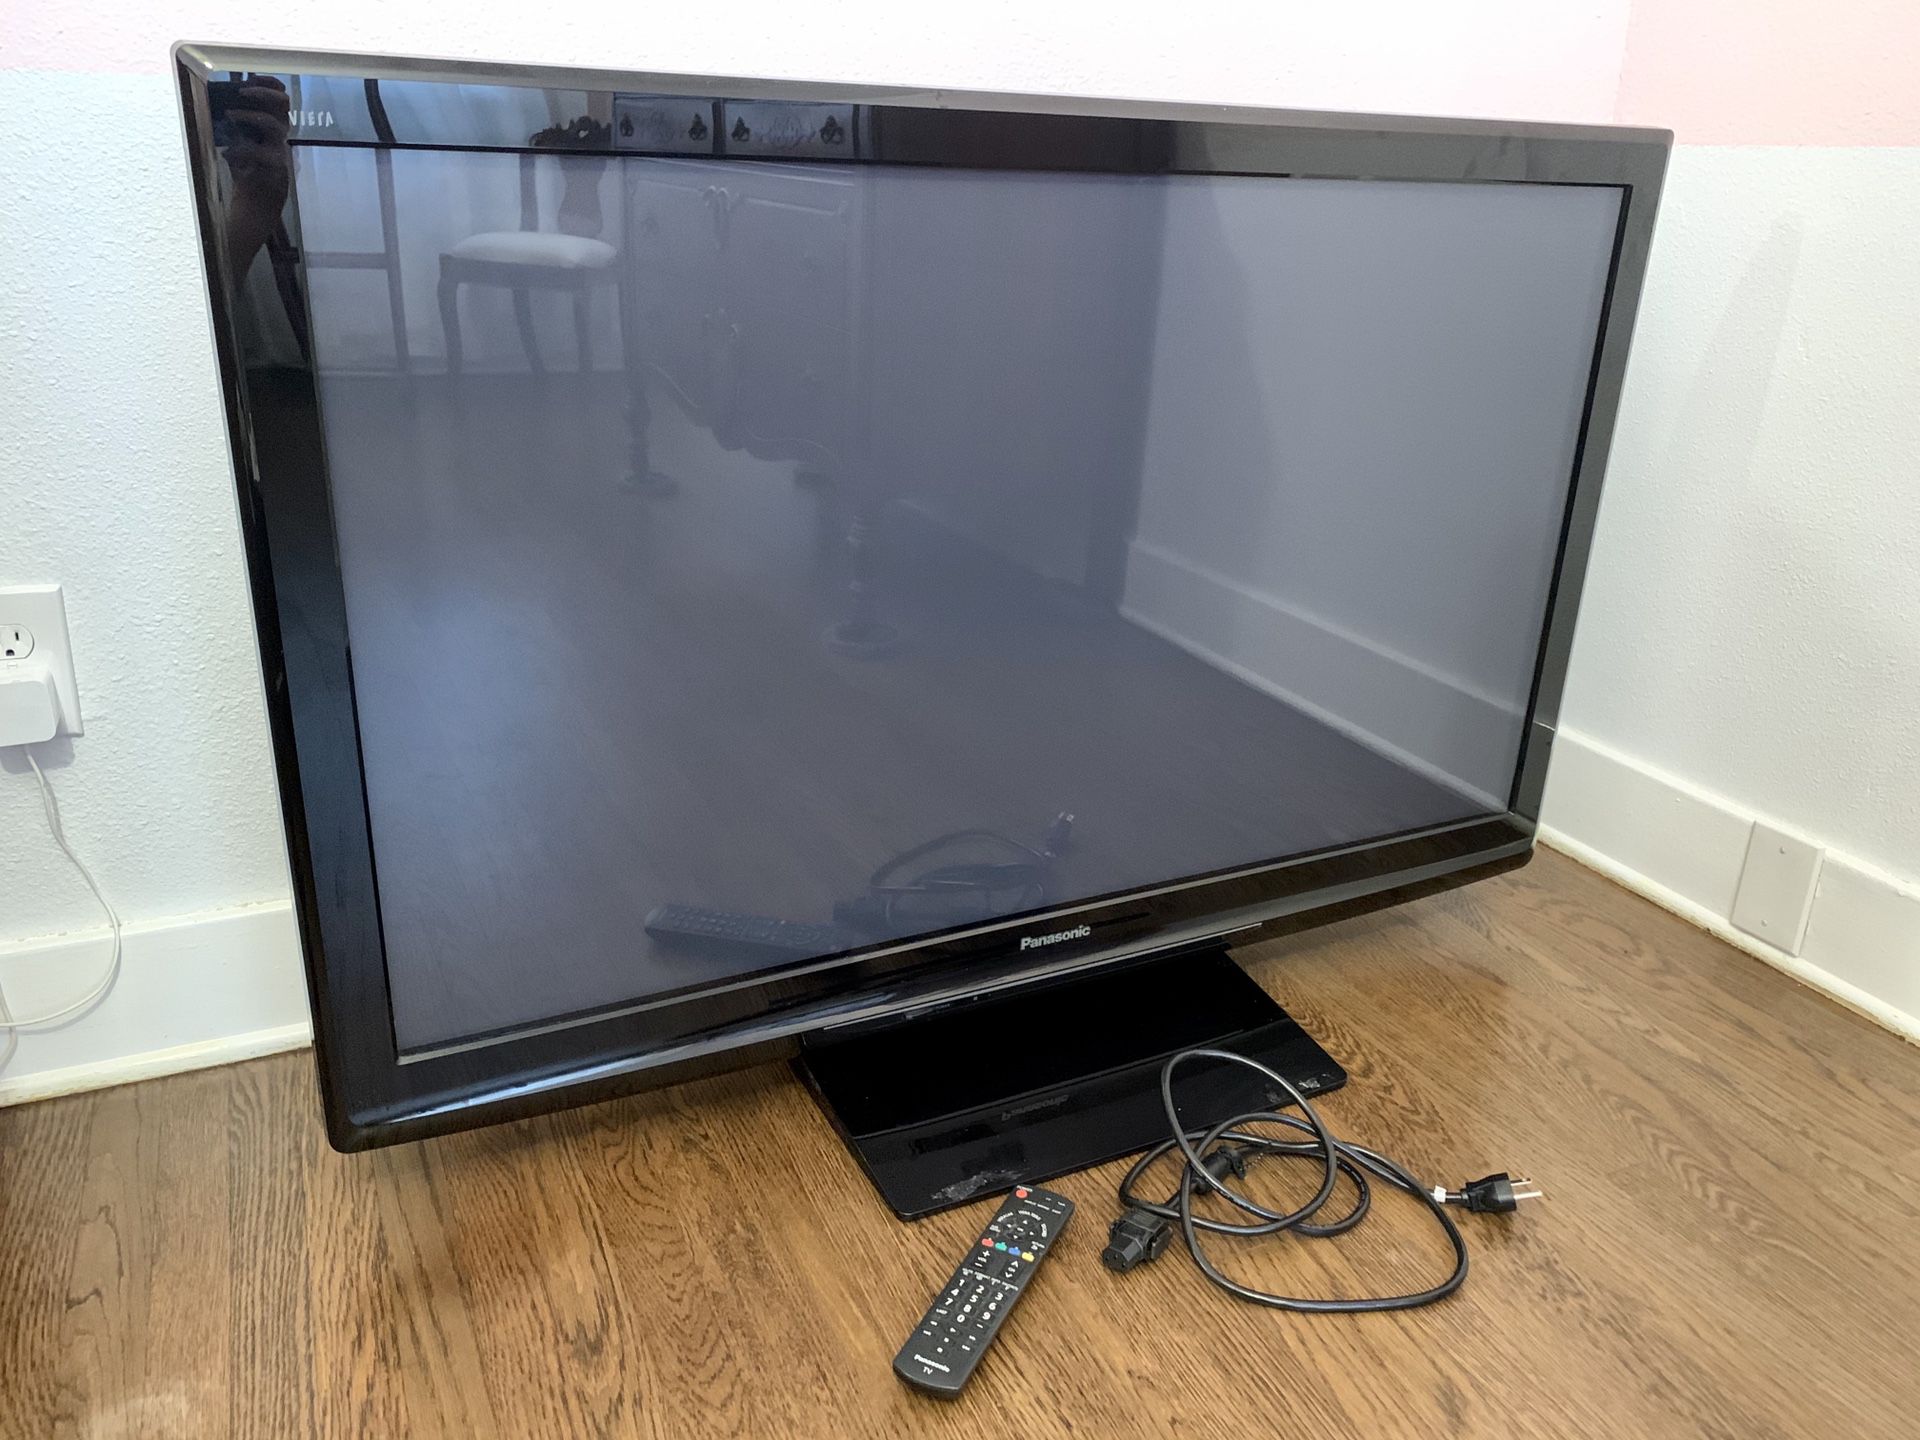 Plasma 50 inch television. Includes remote and power cable. 50” TV.